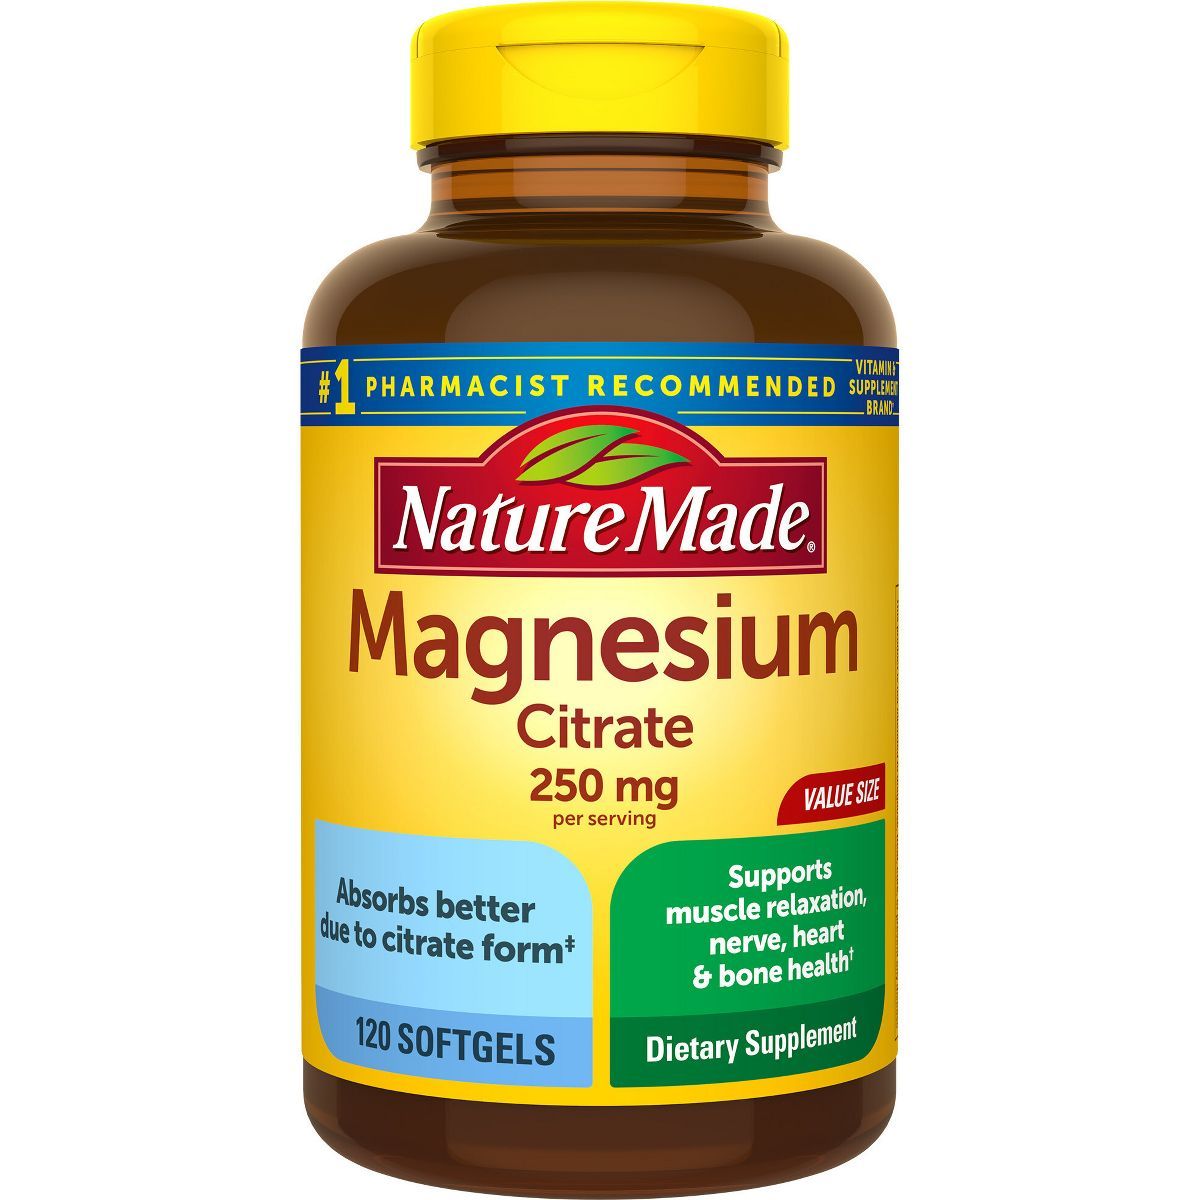 Nature Made Magnesium Citrate 250mg Muscle, Nerve, Bone & Heart Support Supplement | Target